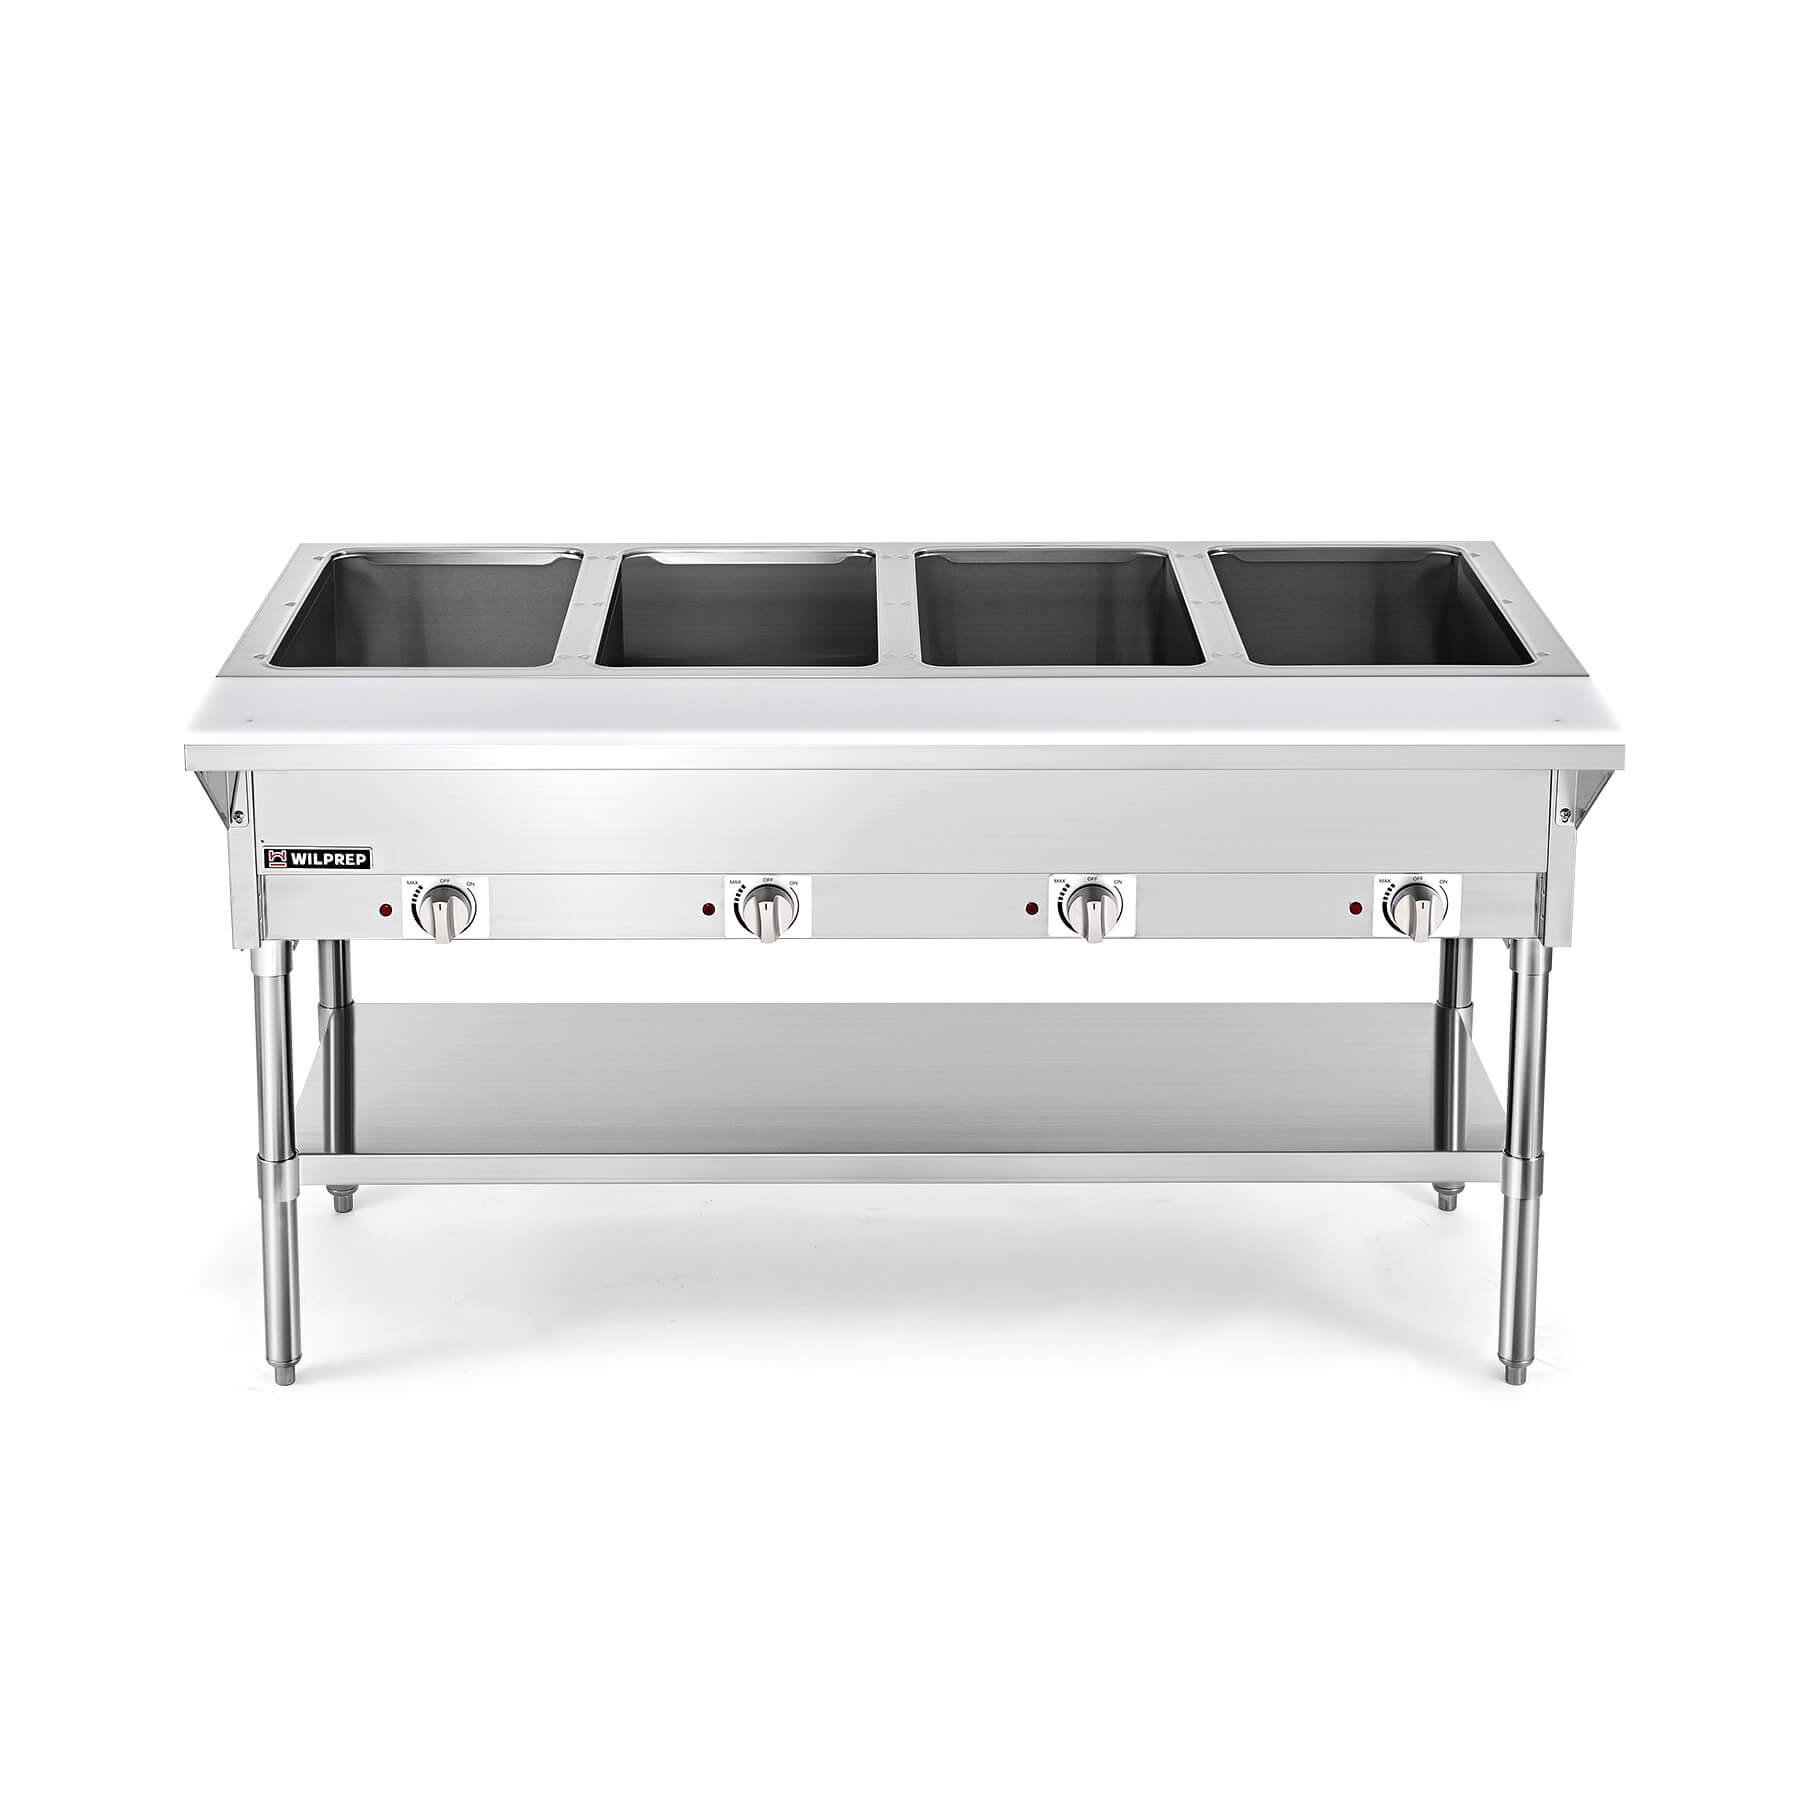 4 Well Electric Steam Table with Storage Shelf 1000W